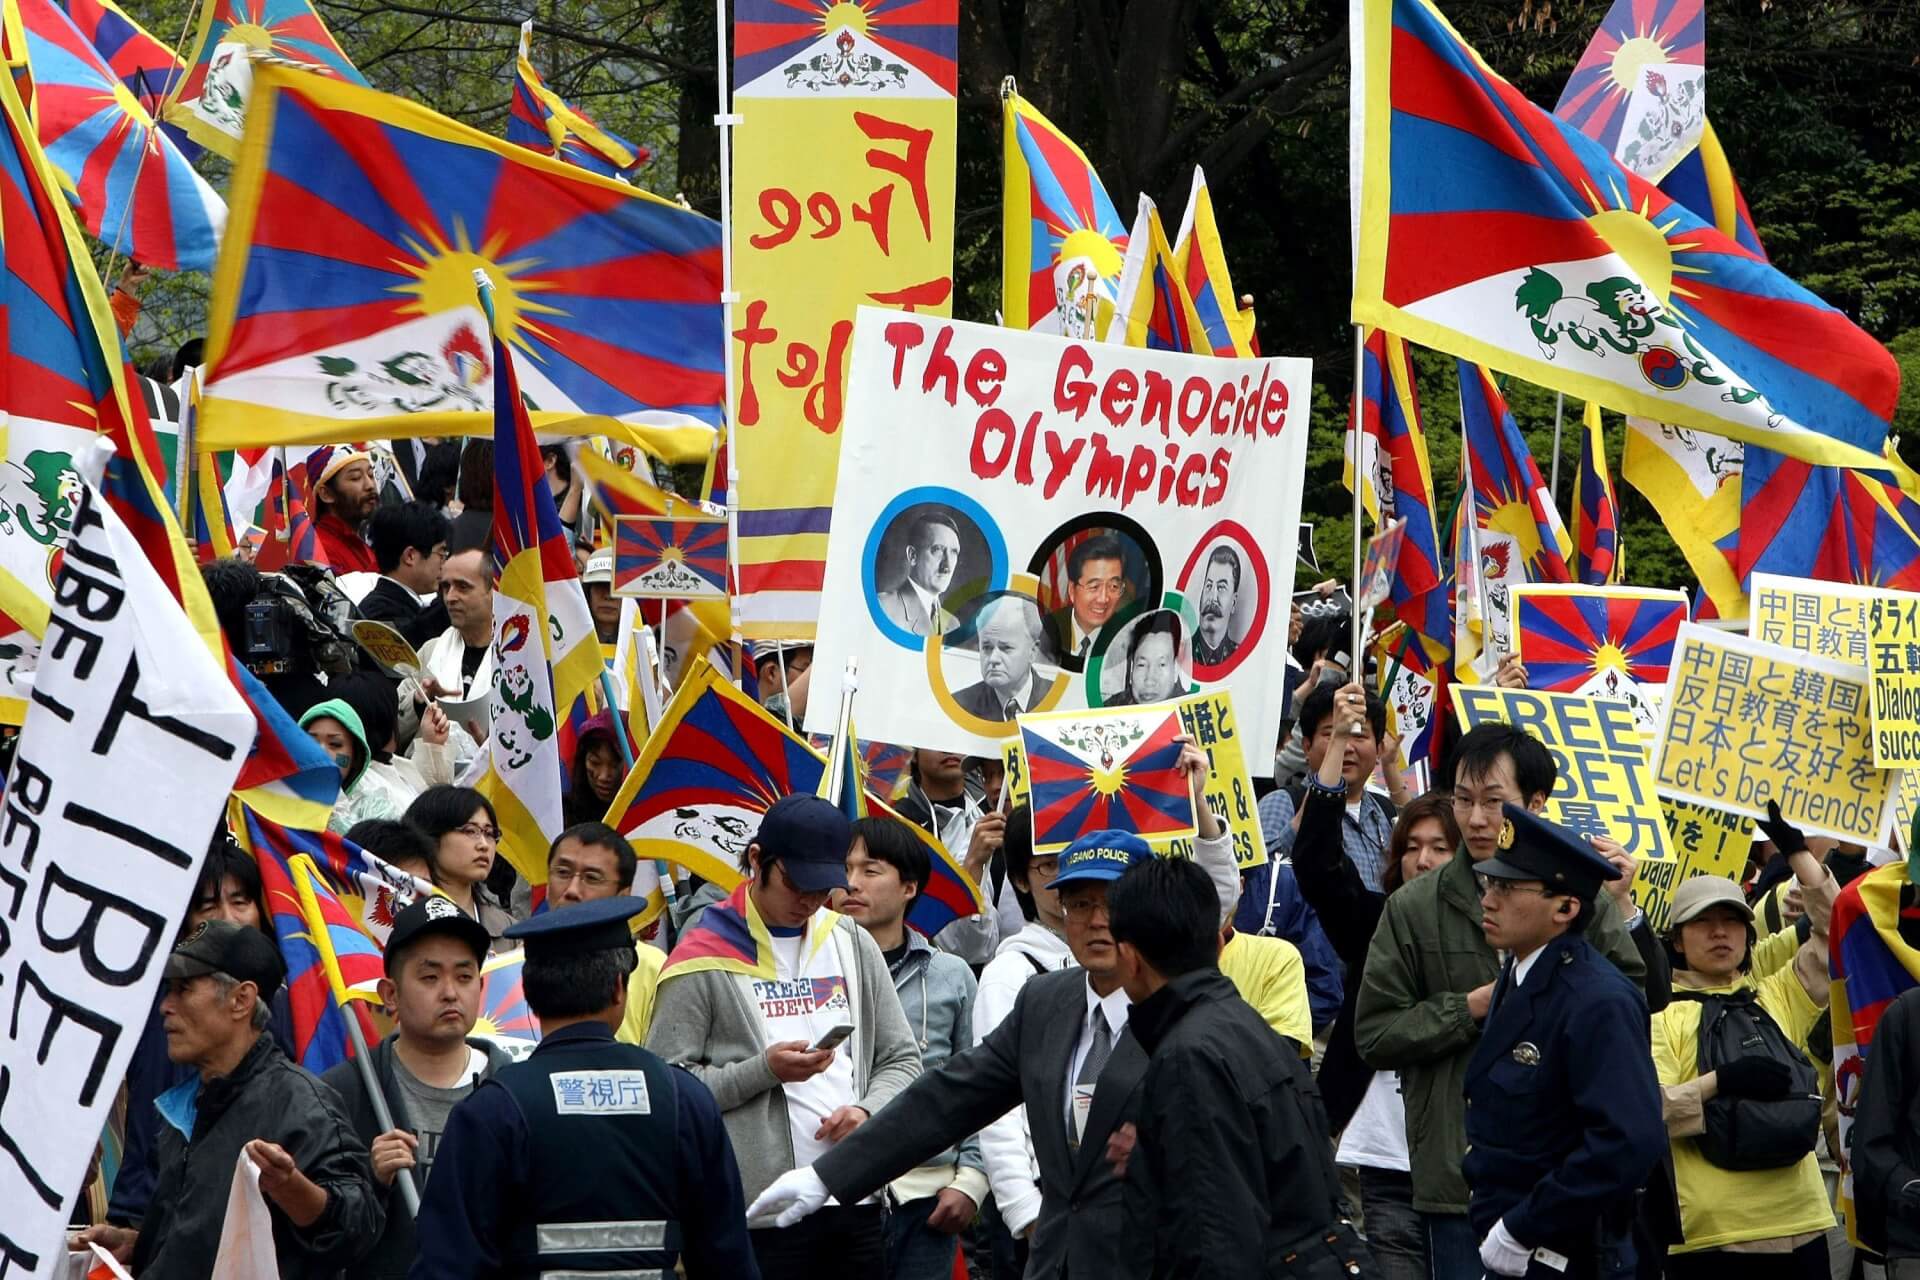 Hundreds of Tibetan and Uyghur Activists Protest IOC’s Complicity in China’s Atrocities